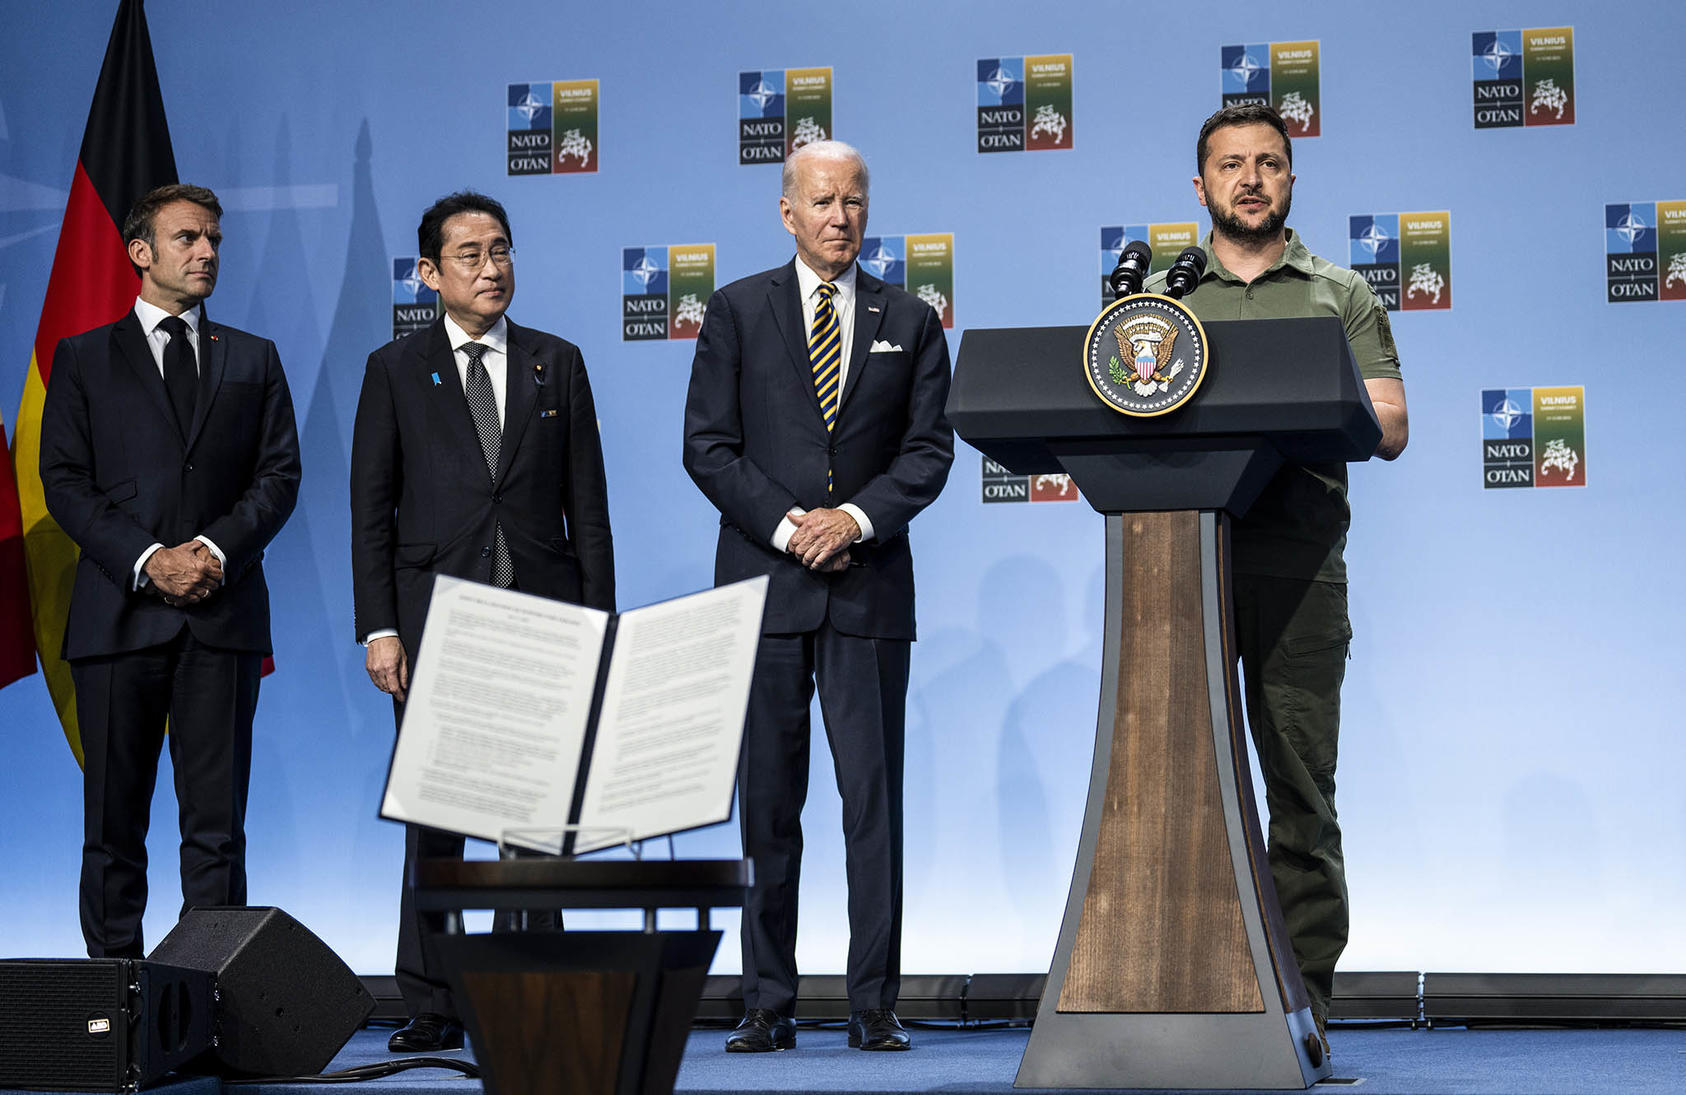 Ukraine’s President Volodymyr Zelenskyy speaks alongside the leaders of France, Japan and the United States in July as their nations and others restated support for Ukraine and its diplomatic efforts on a peace plan. (Doug Mills/The New York Times)